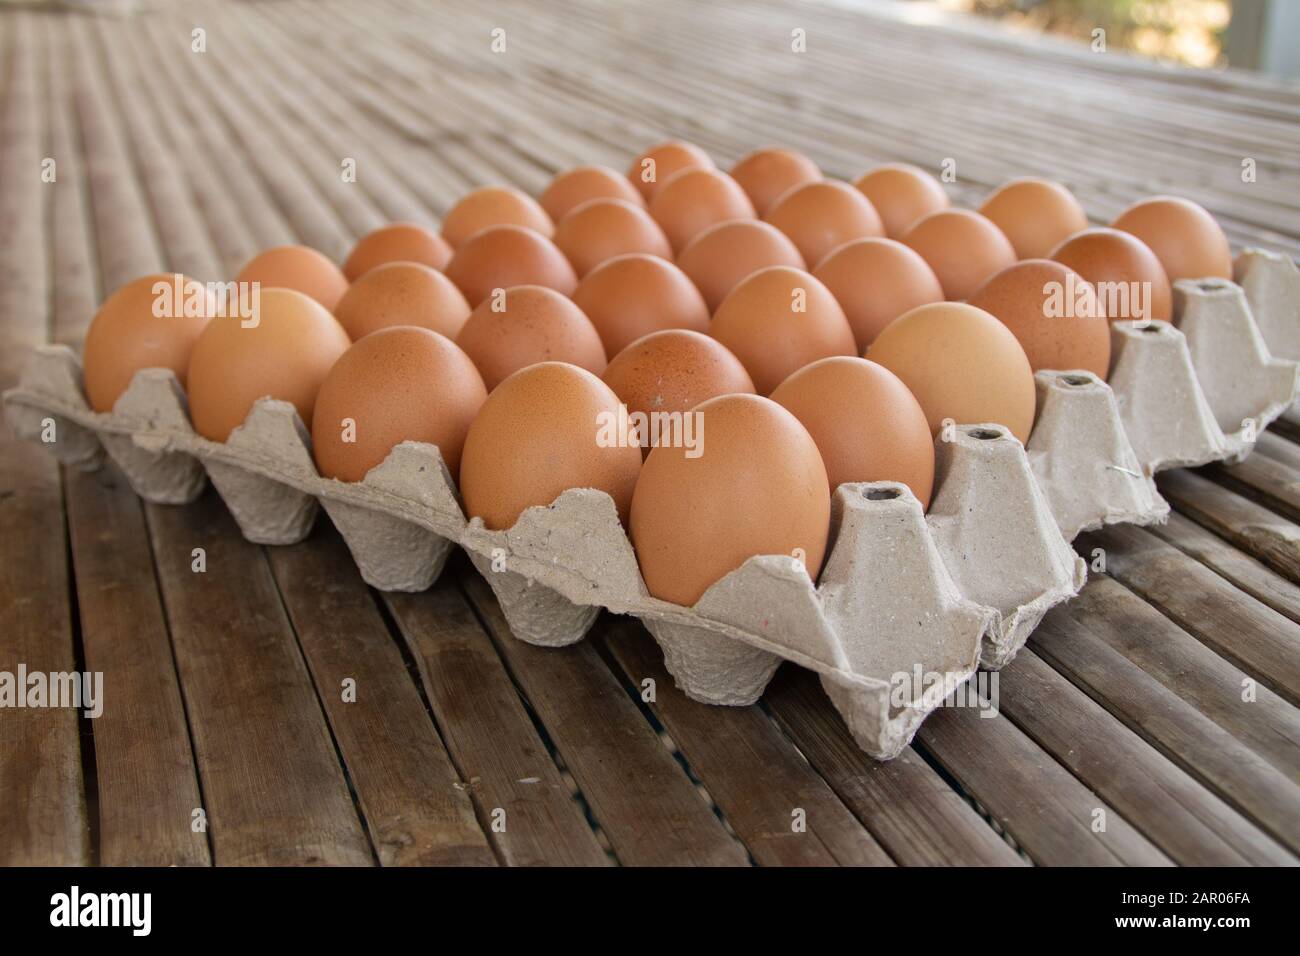 Brown chicken eggs are lined up in a tray. Many brown chicken eggs are together in a tray. There is a bamboo background. Stock Photo